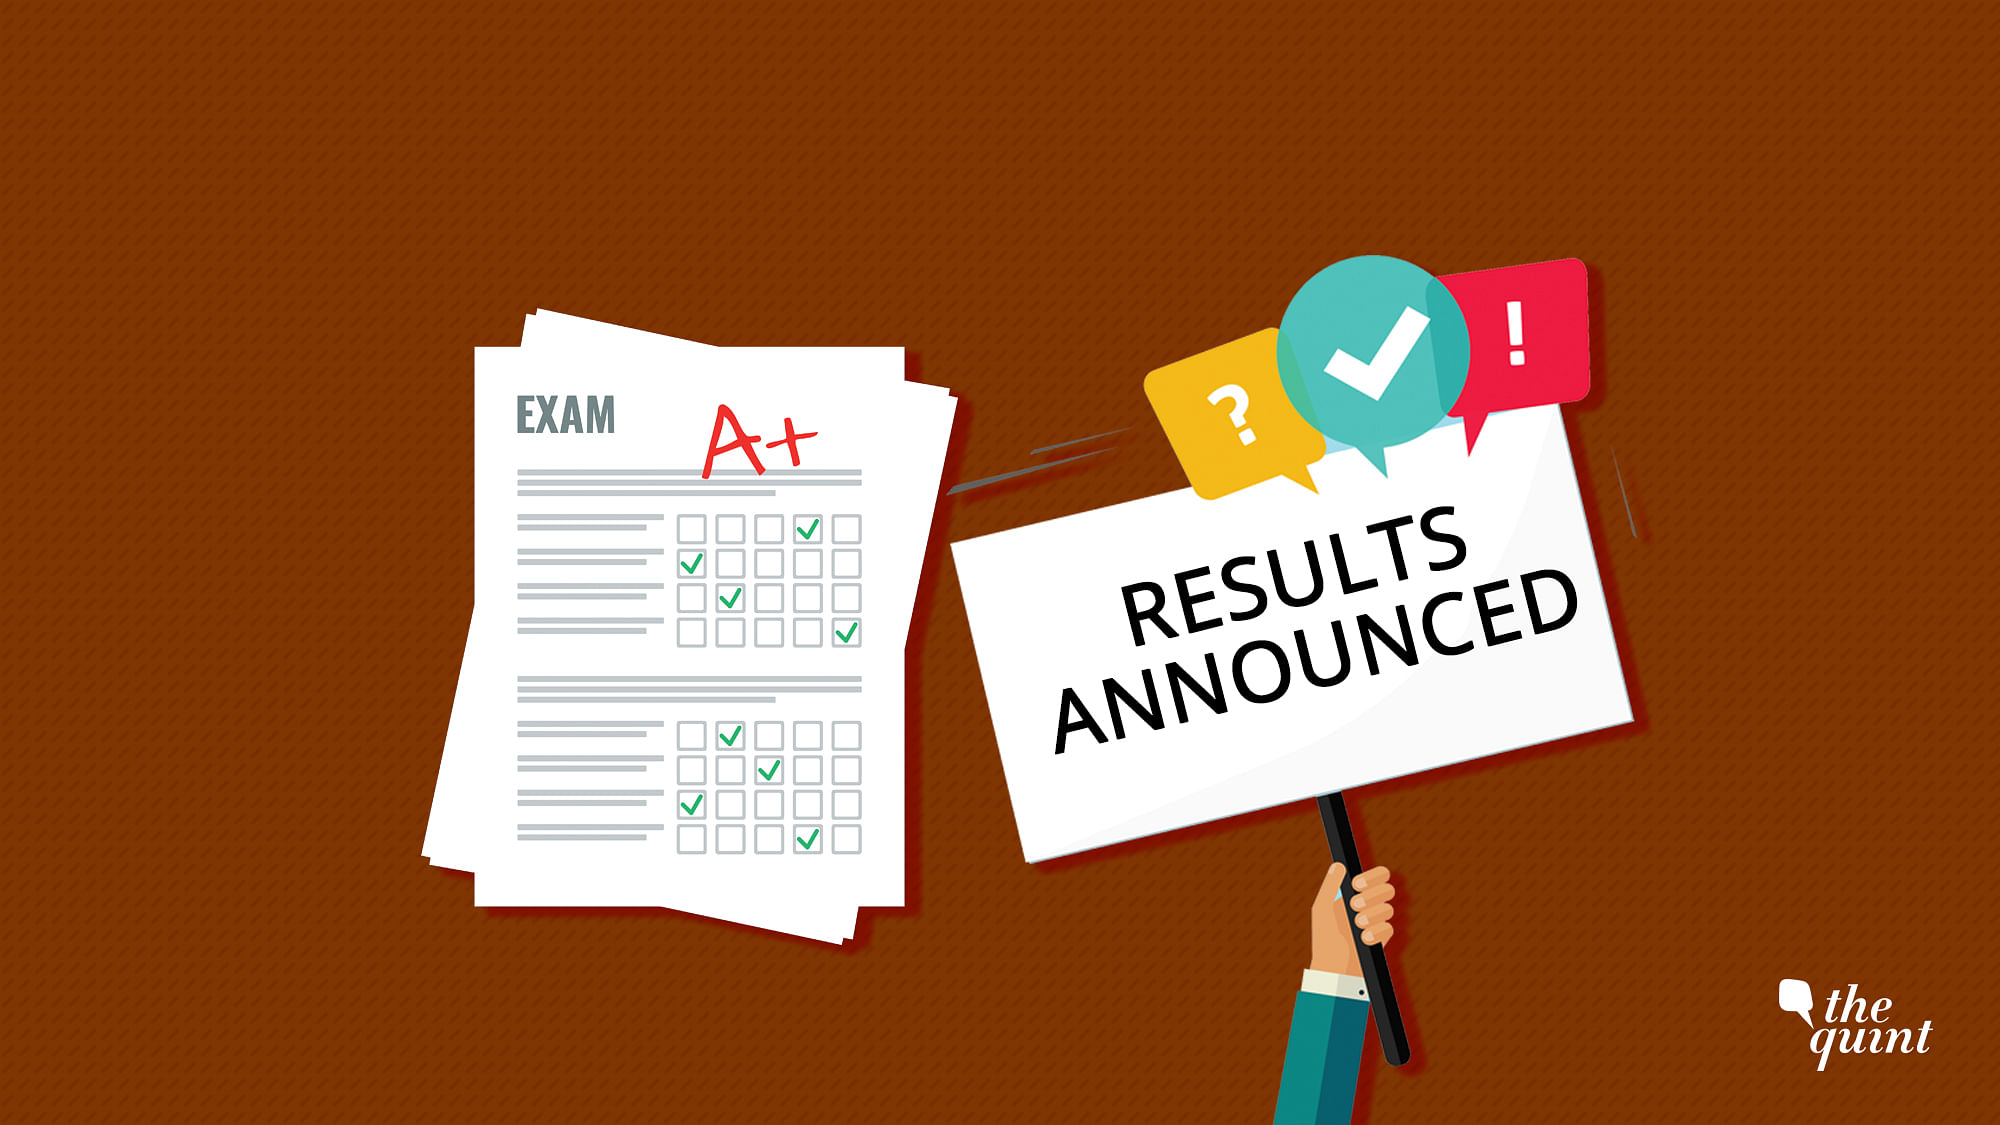 ICSE Class 10 exam results have been declared. Click on the direct link below to check your result!